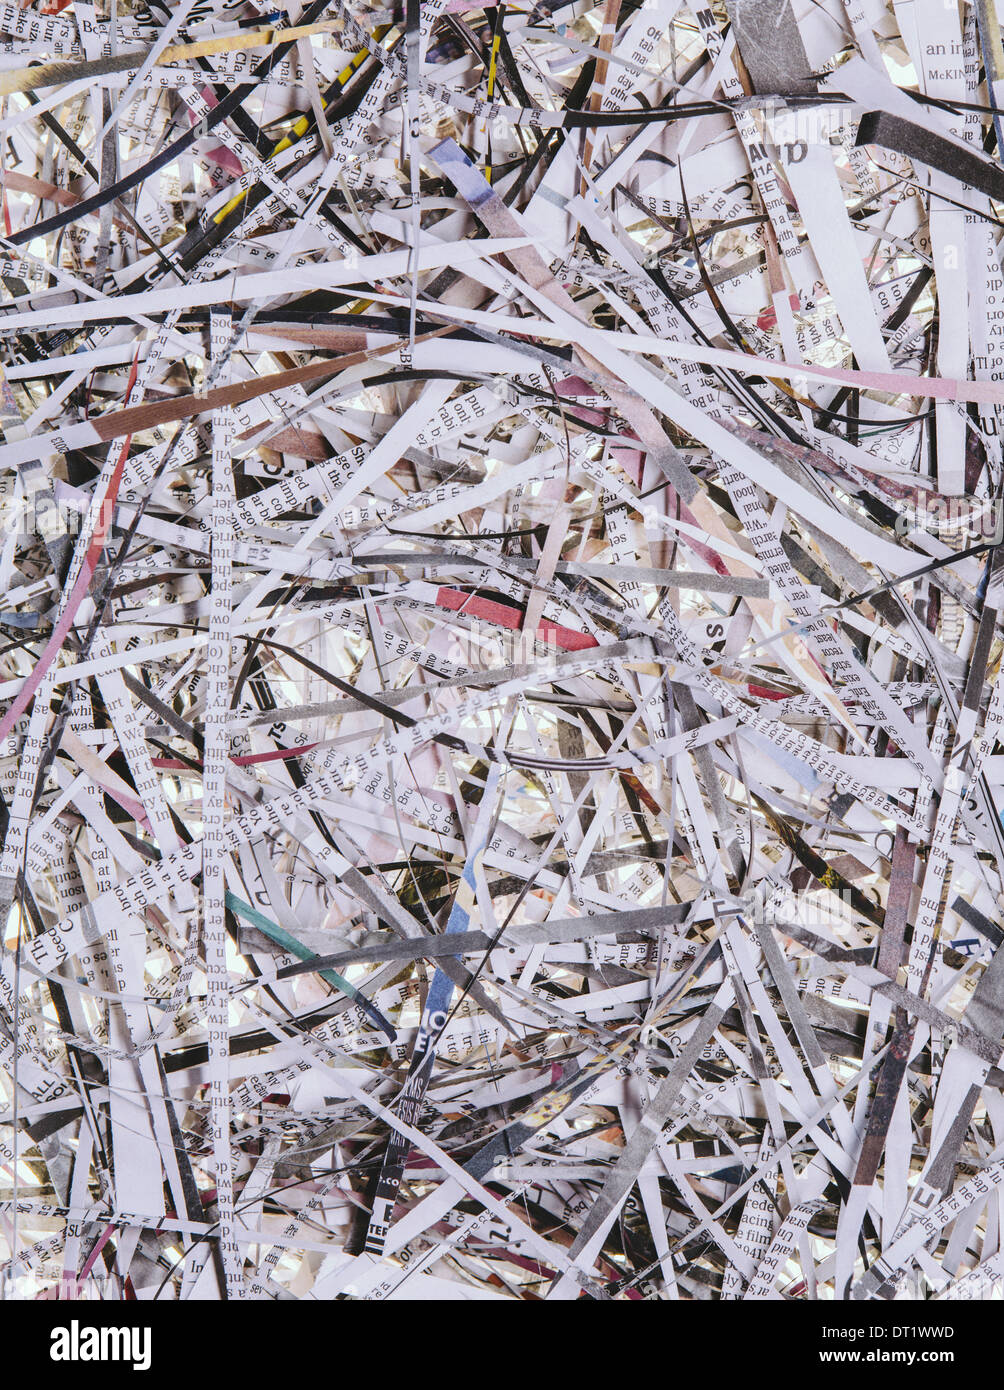 A pile of long thin shredded pieces of printed newspapers Stock Photo